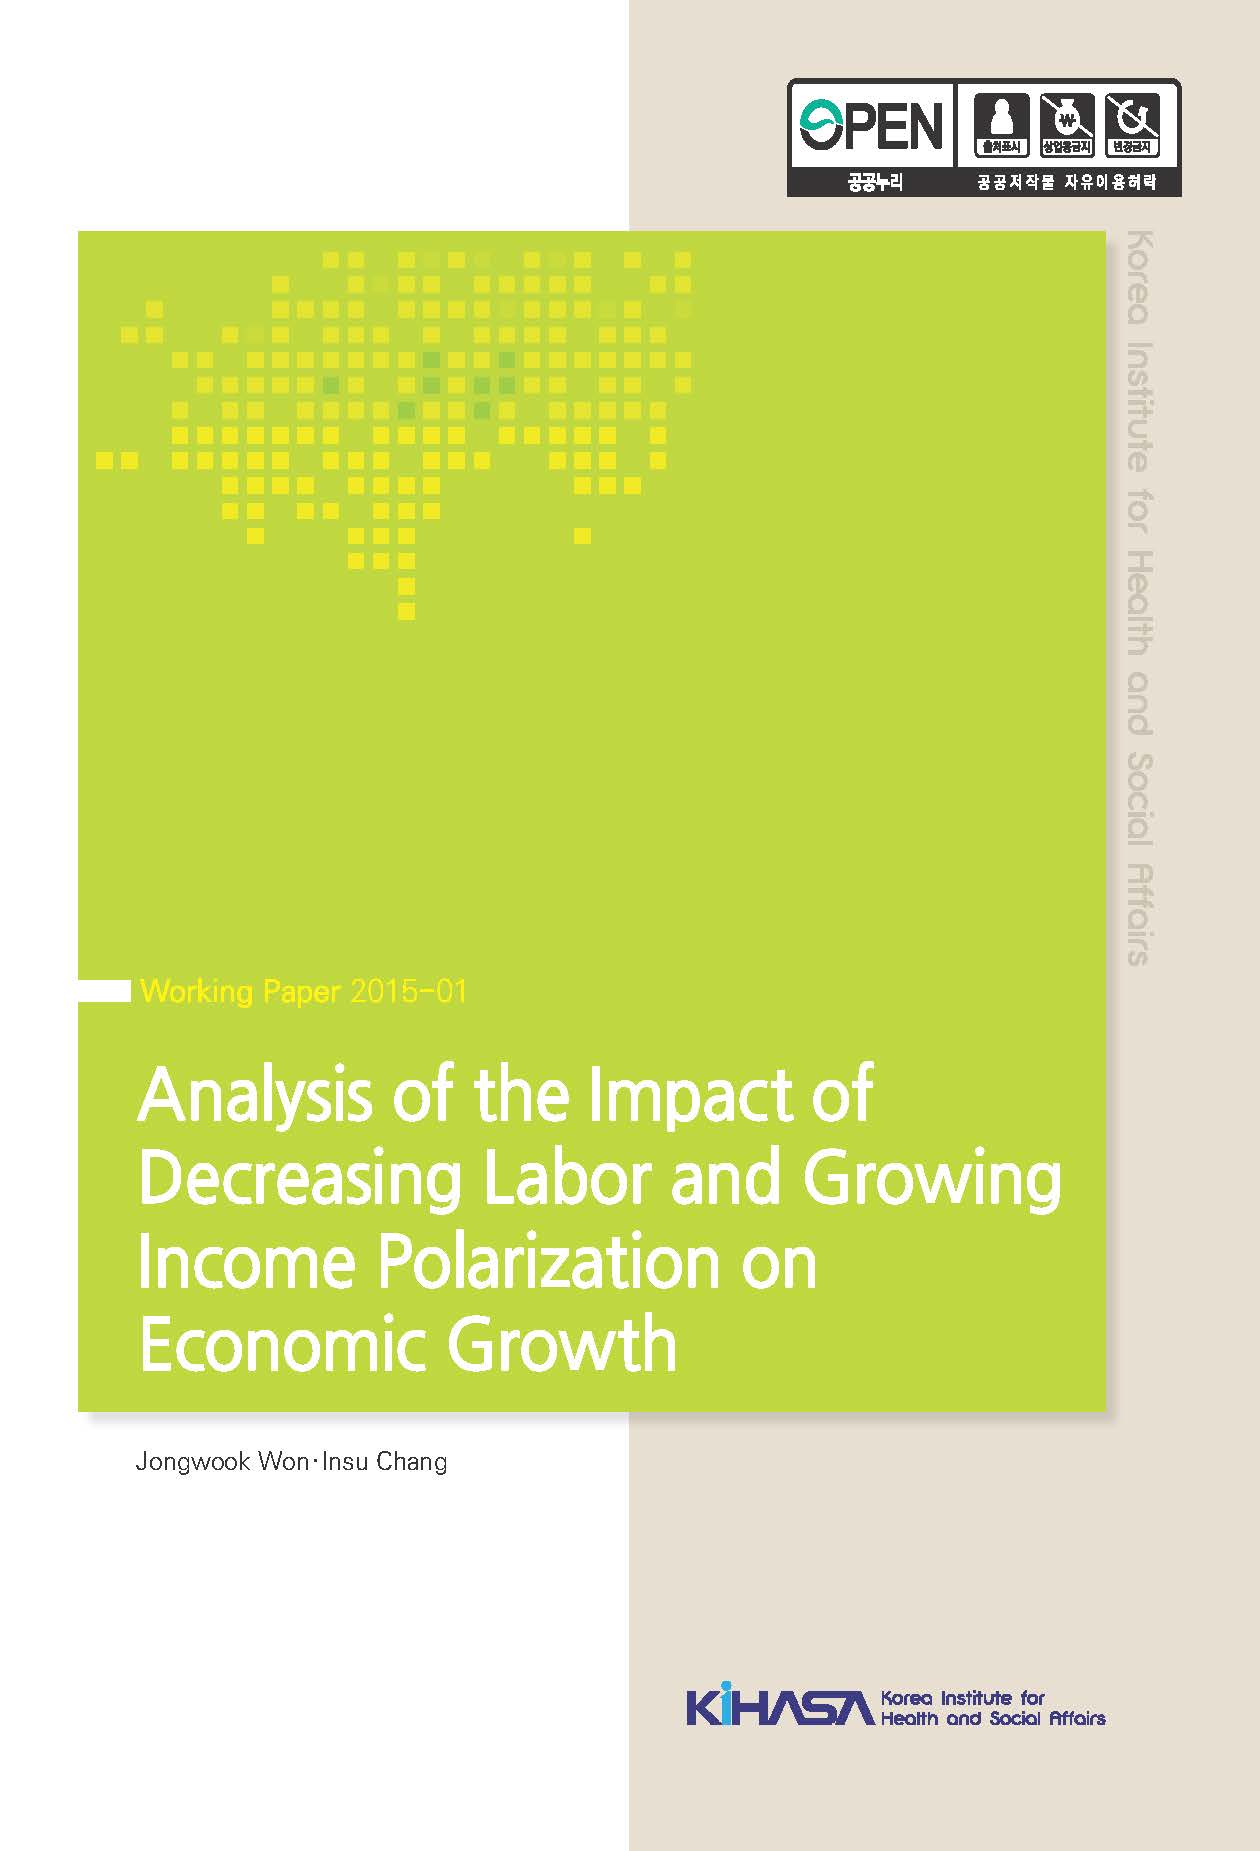 Analysis of the Impact of Decreasing Labor and Growing Income Polarization on Economic Growth